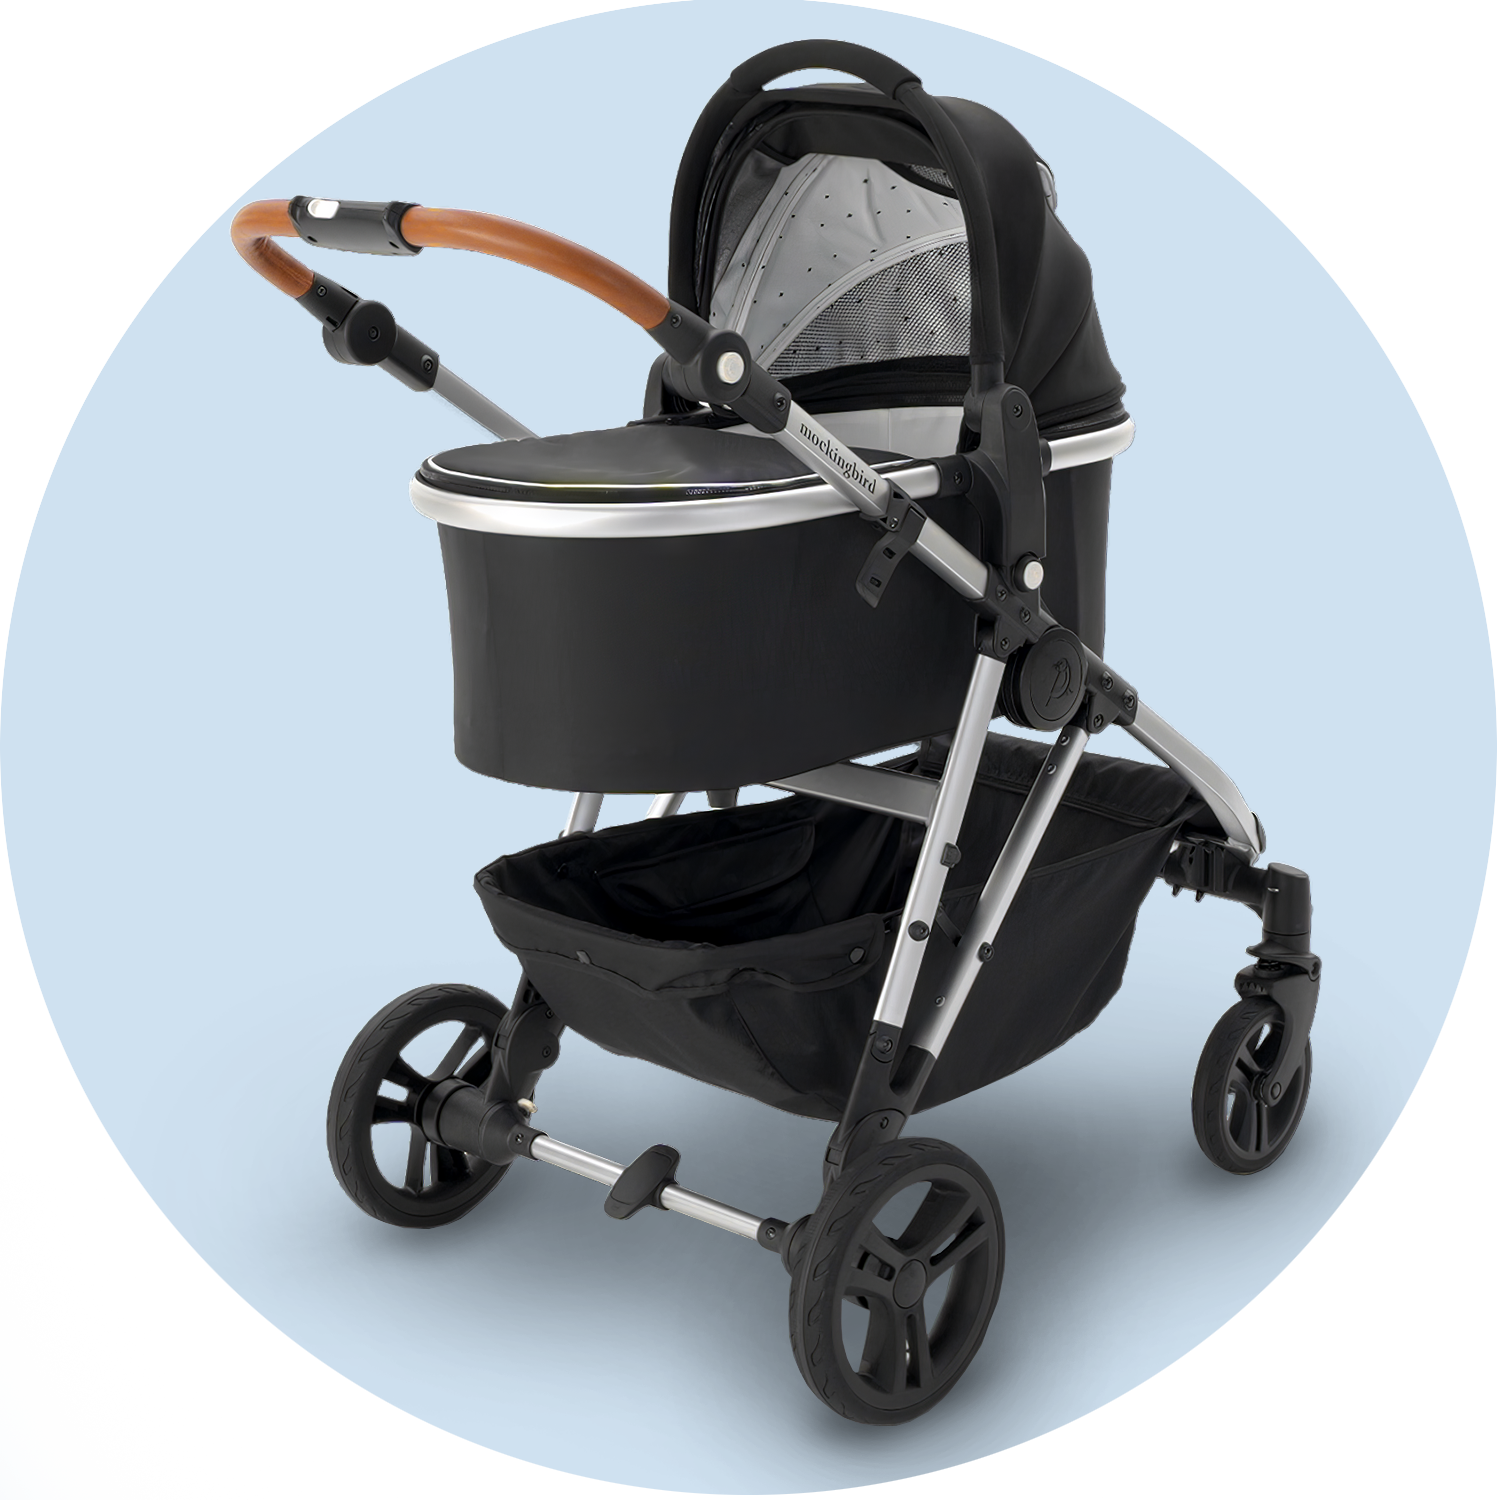 Modern black baby stroller with adjustable handle and large wheels, displayed on a plain light blue background.